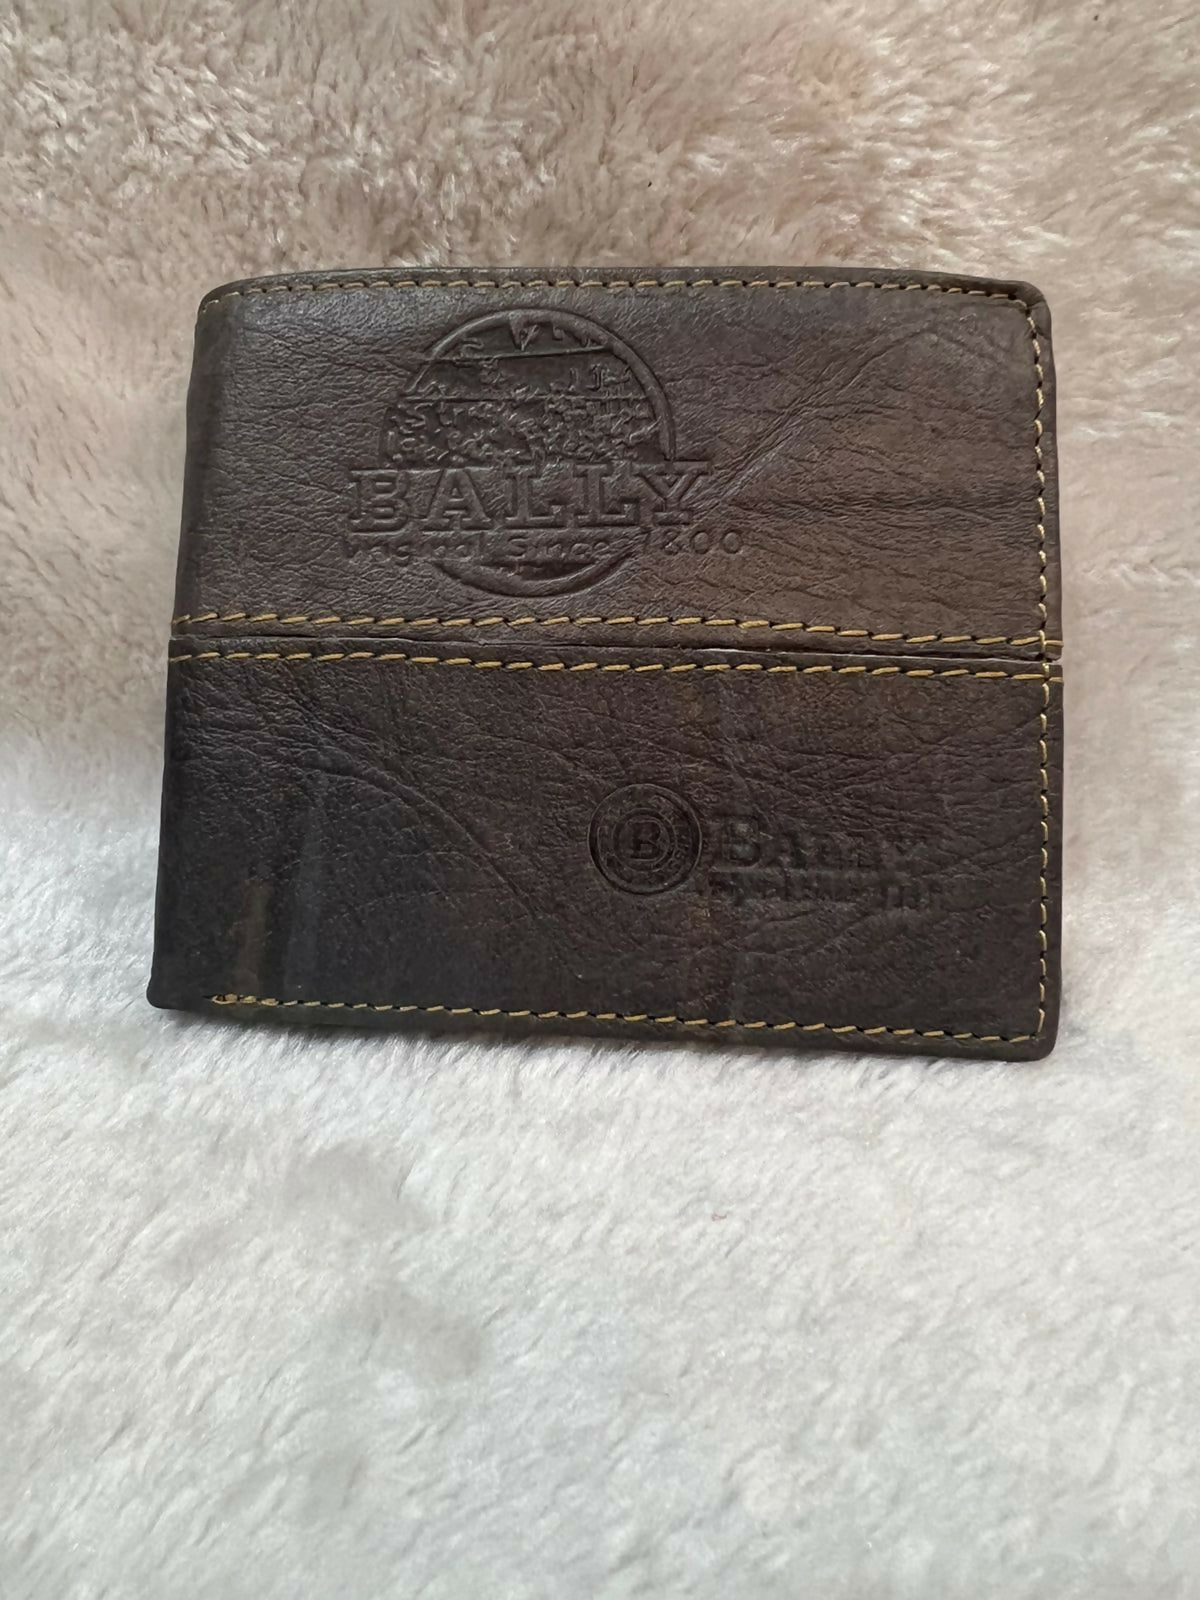 BALLY Leather Wallet Men’s